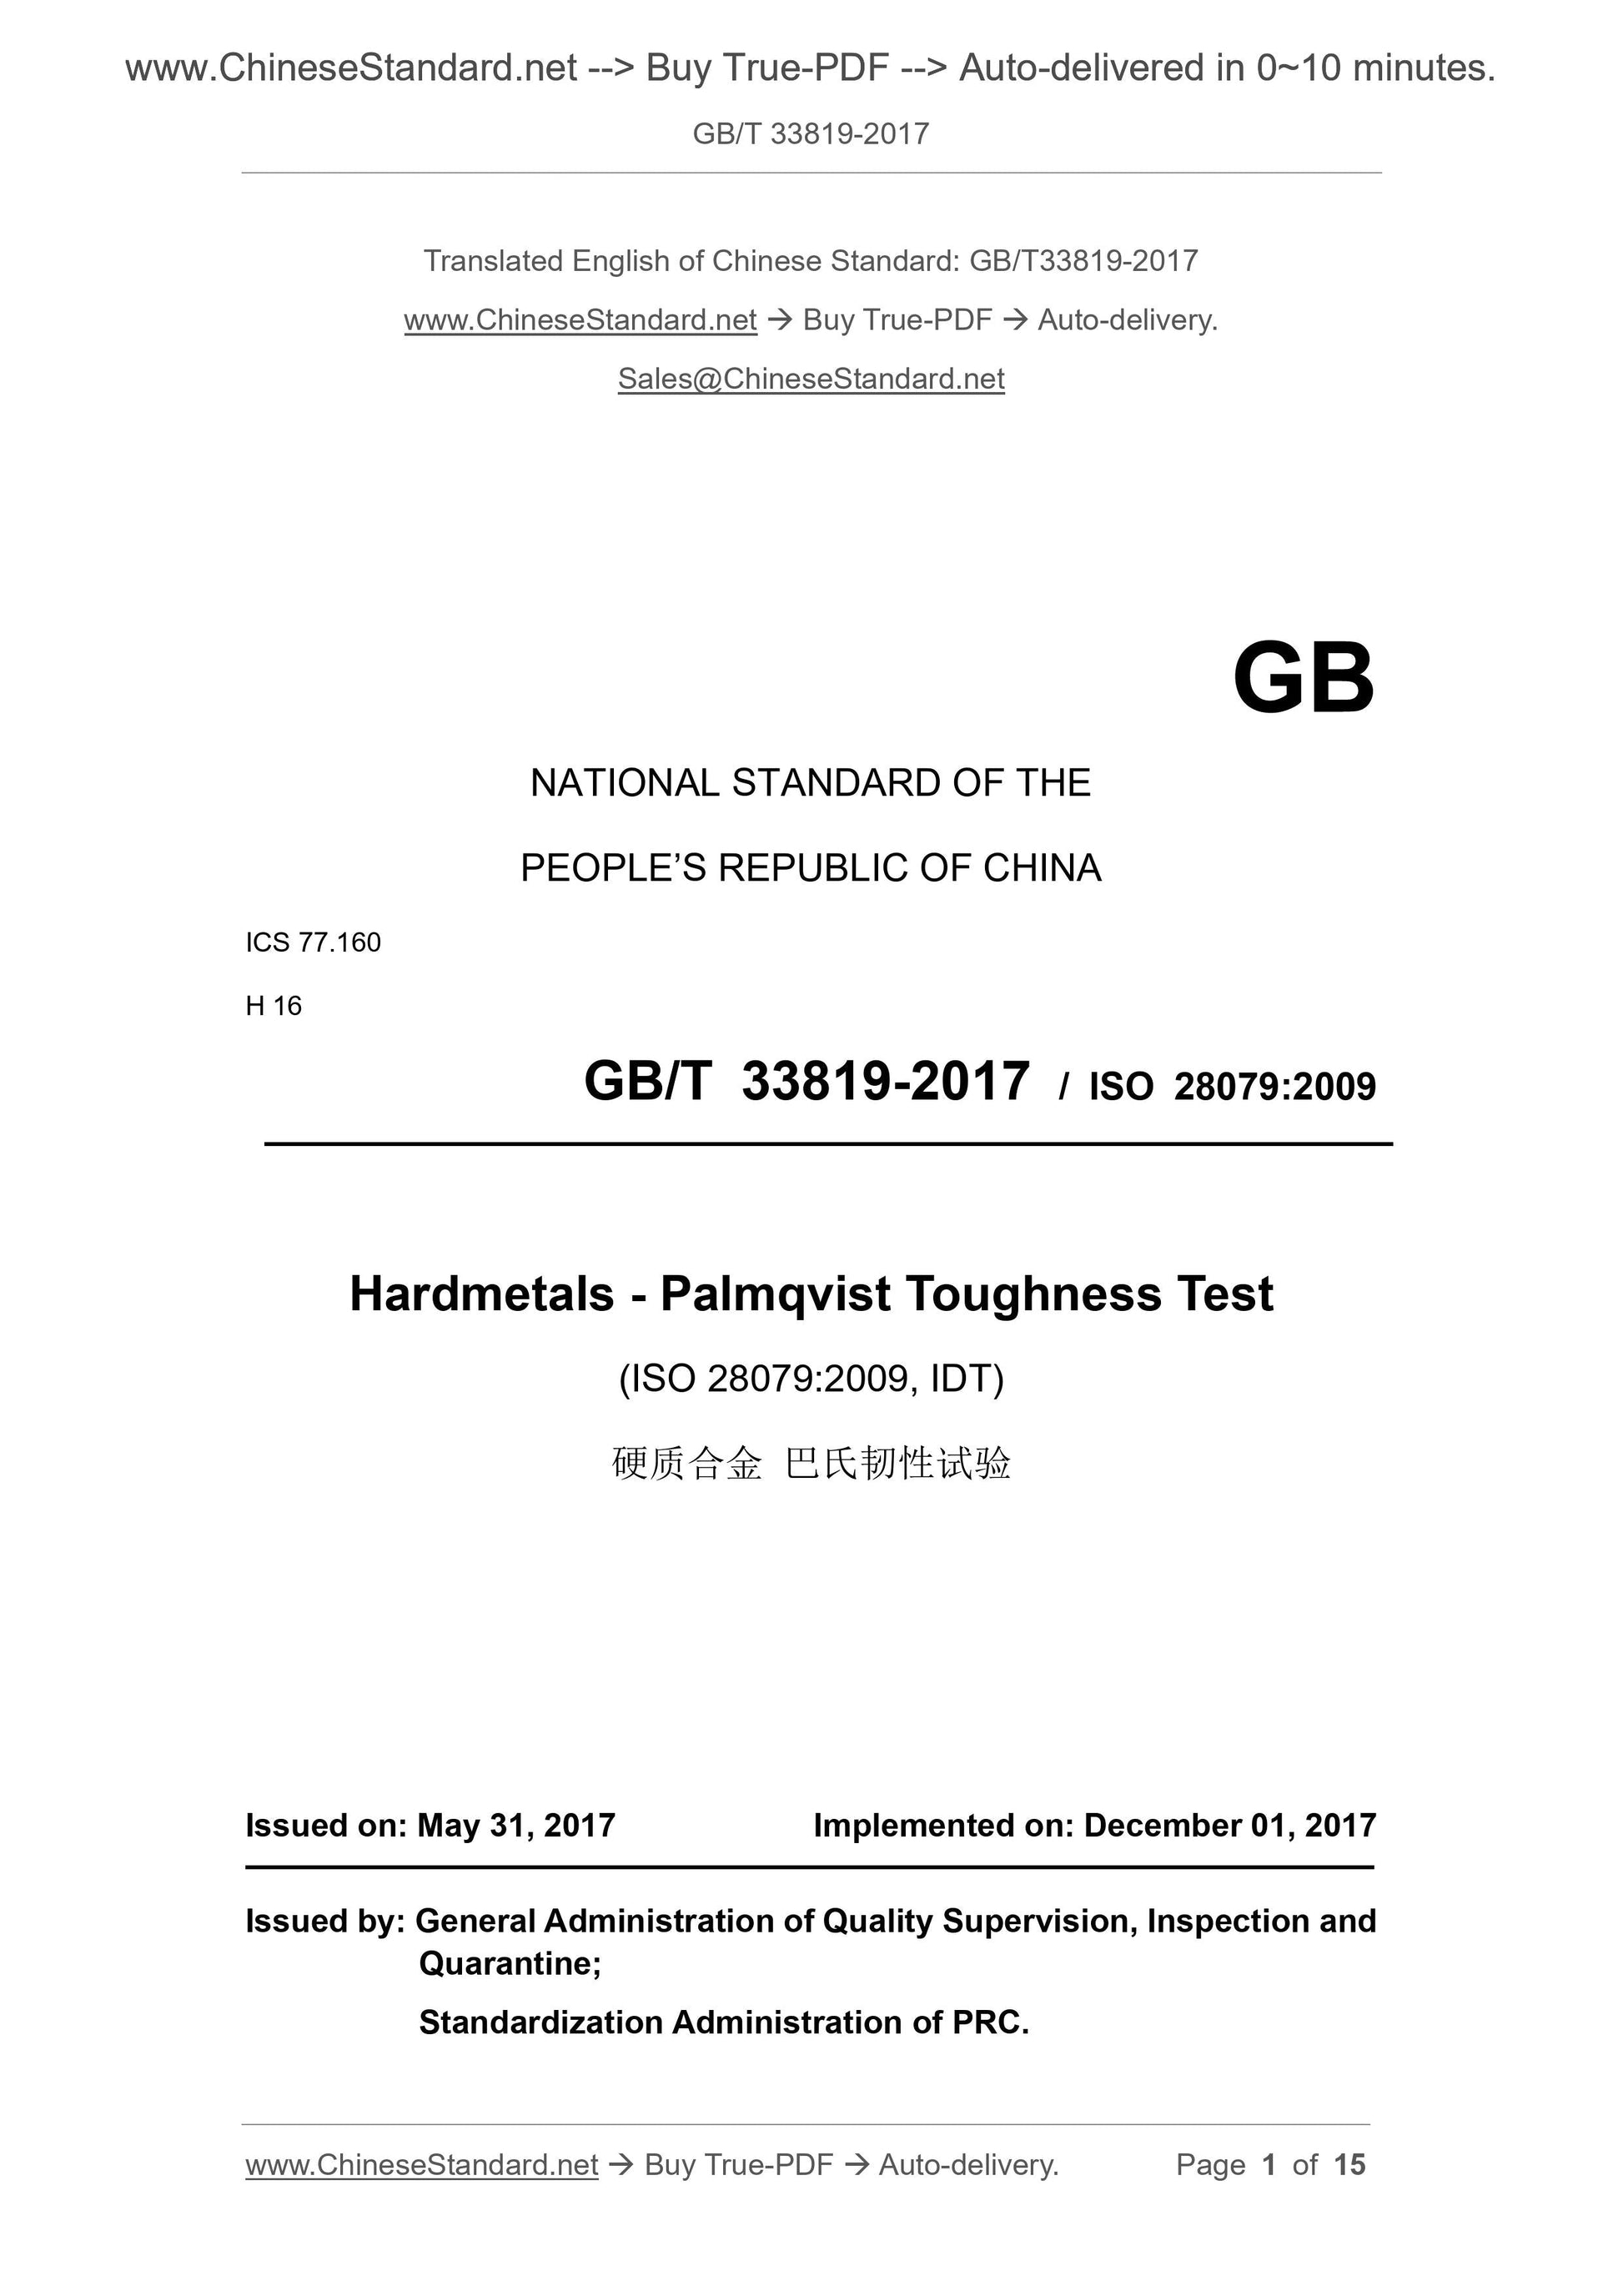 GB/T 33819-2017 Page 1